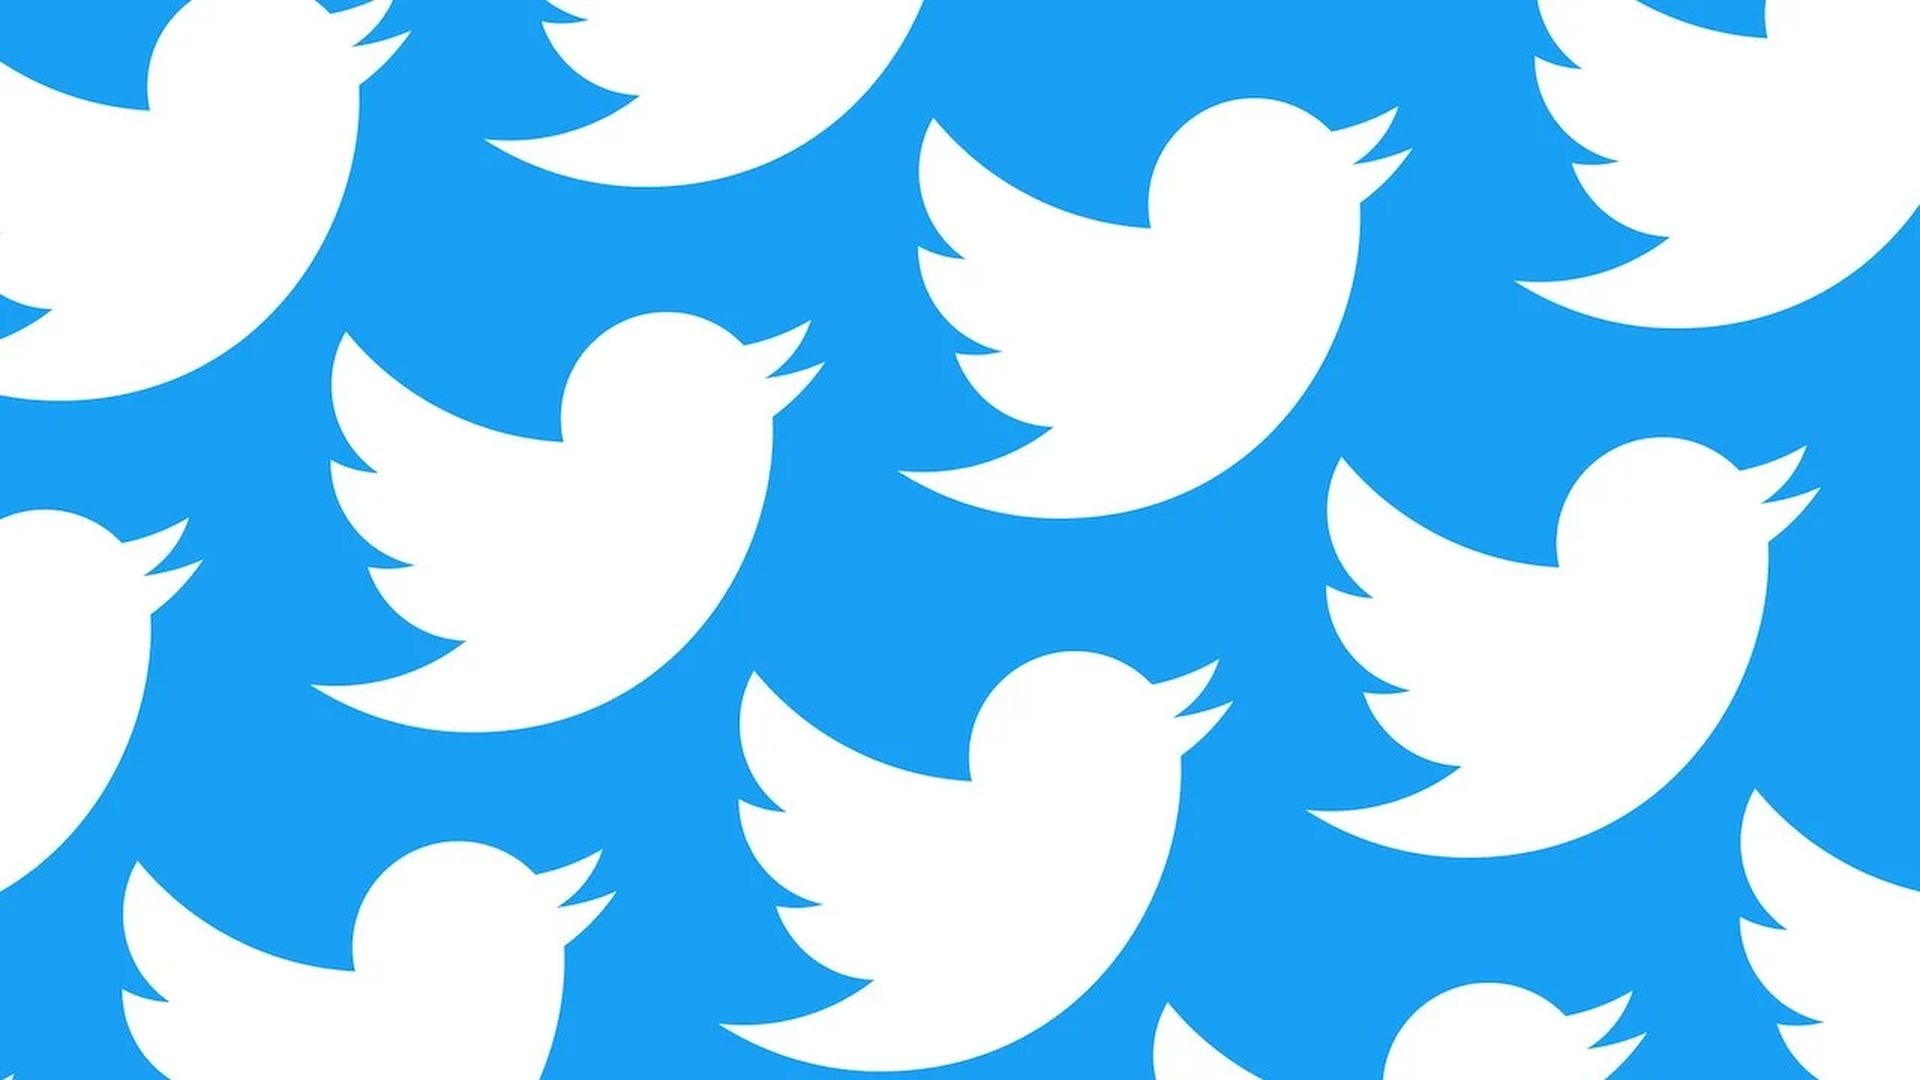 In this article, we are going to go over the Twitter CoTweets feature that is in testing, which will allow users to tweet together.